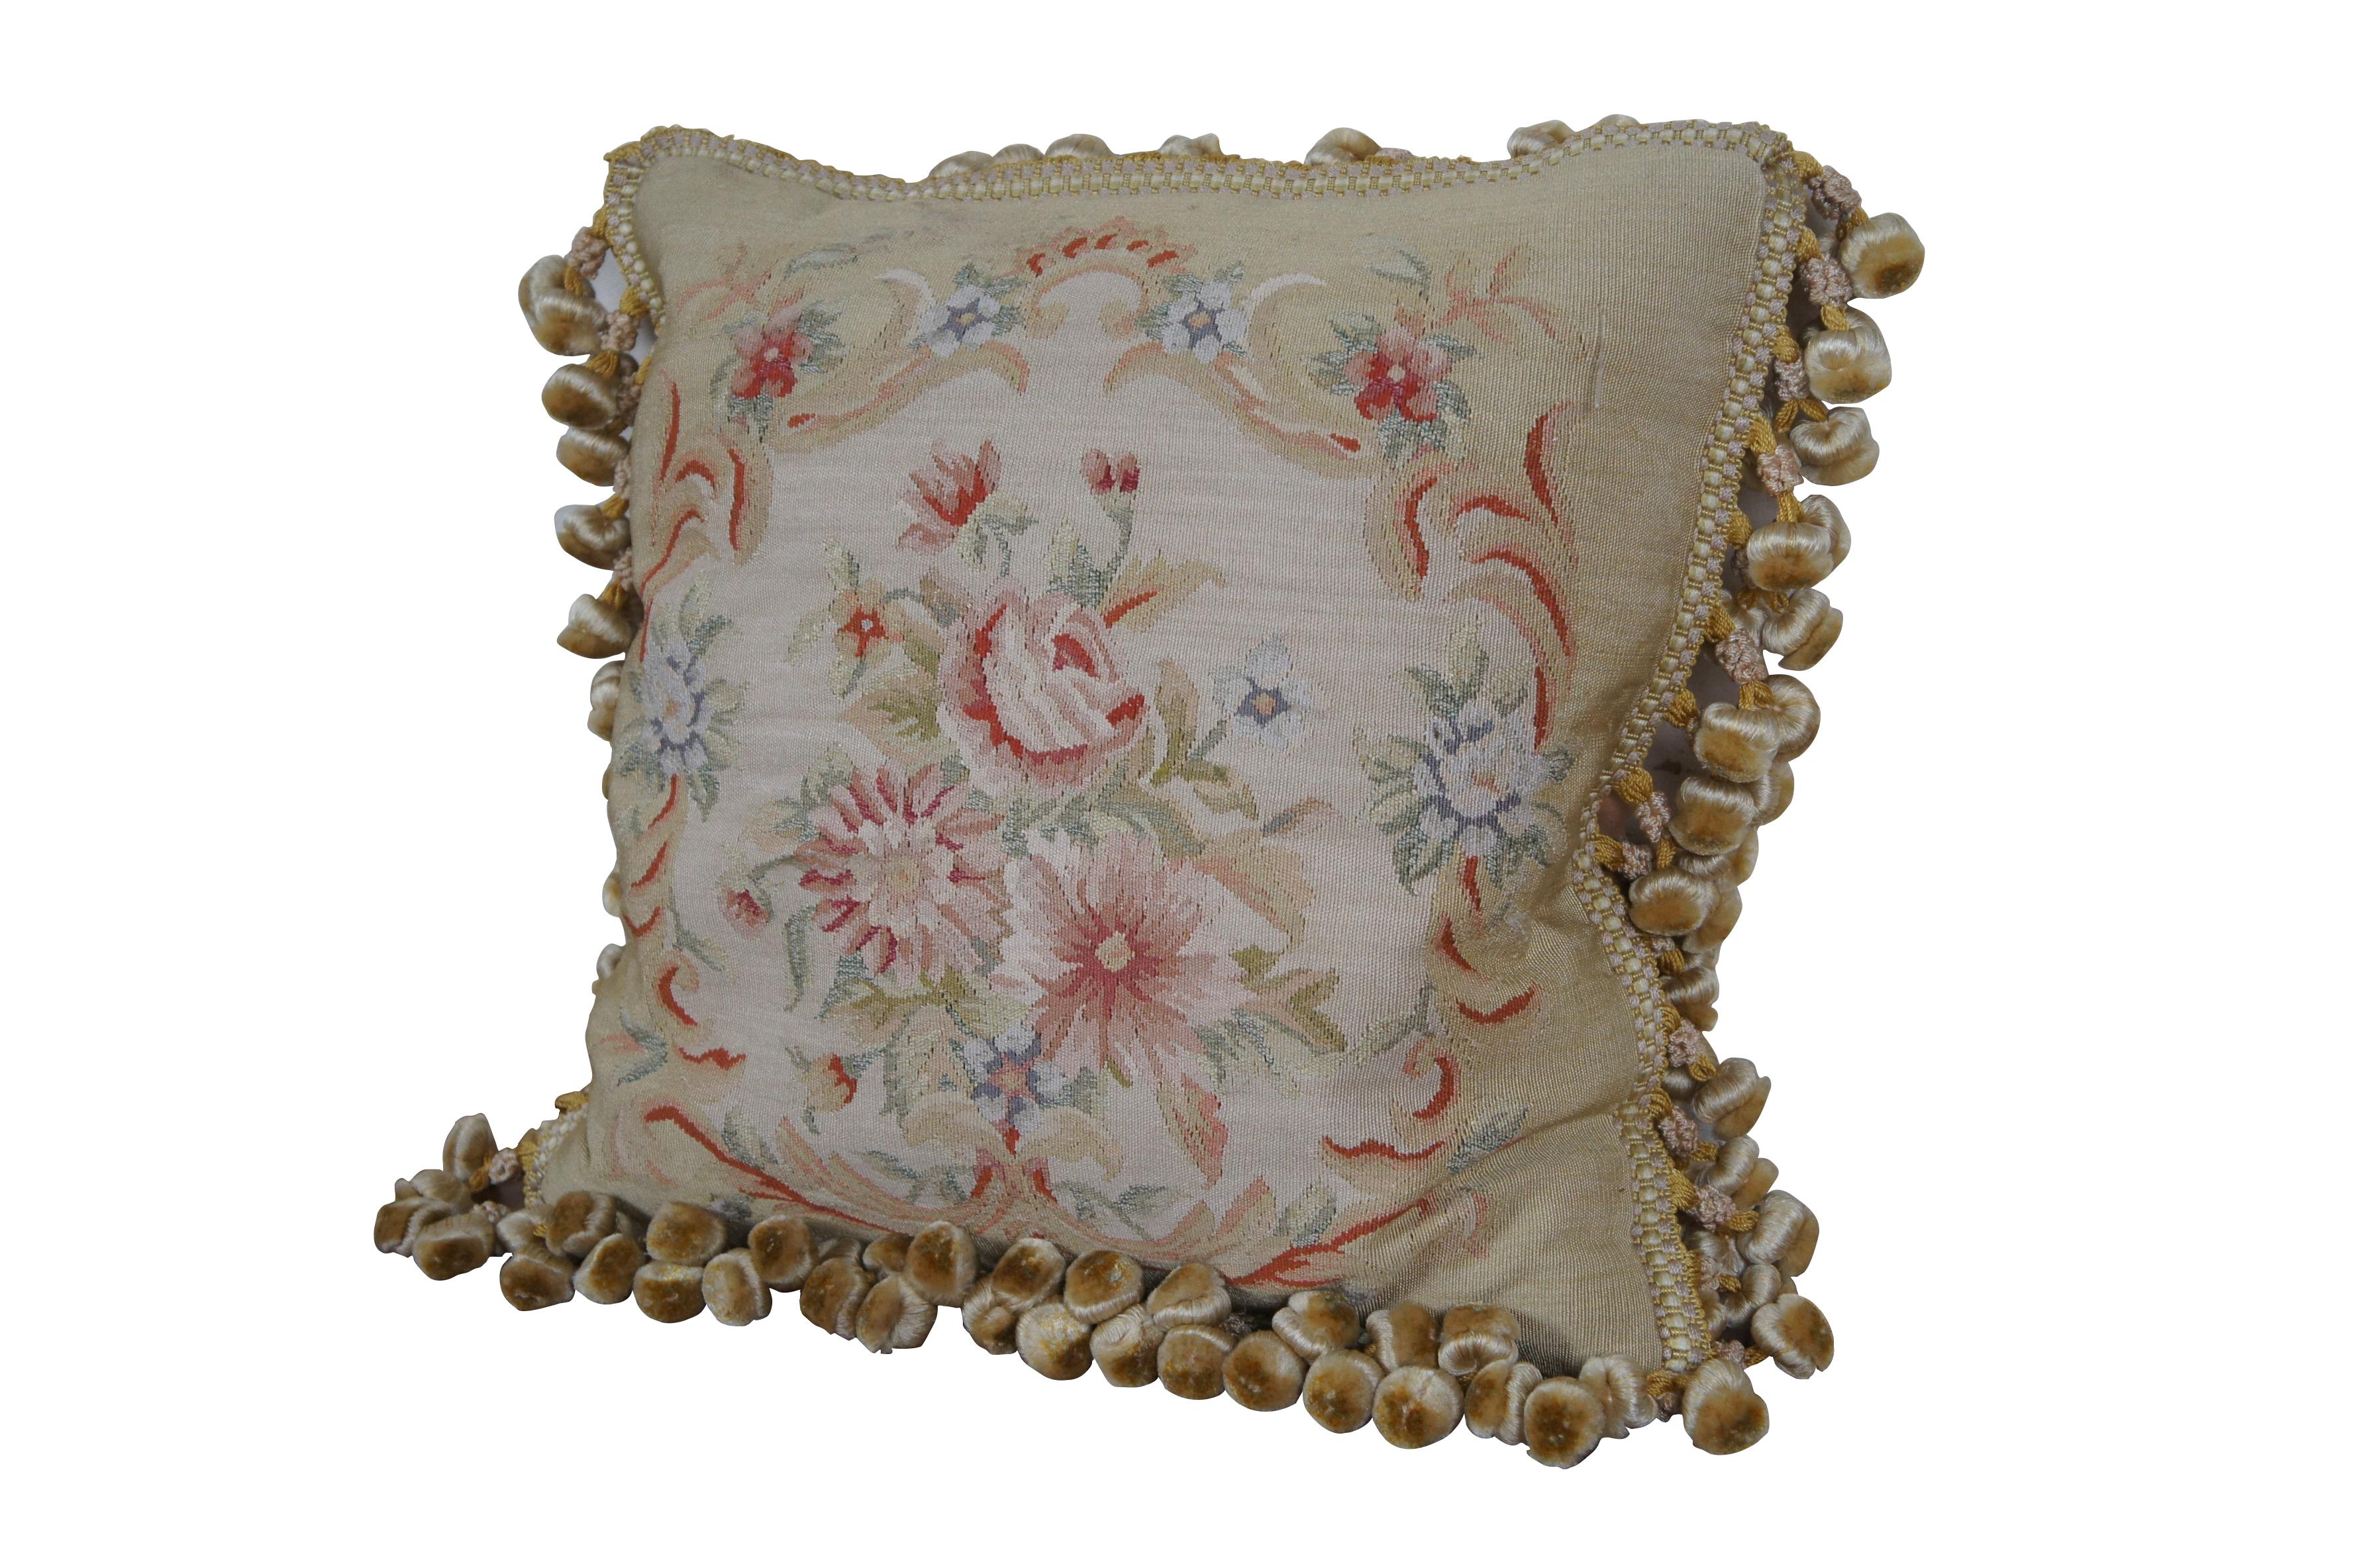 20th century square throw pillow, embroidered in silk with a bouquet of pink and blue flowers, surrounded by a swirling, peach, foliate frame. Gold and cream ball tassel trim. Beige velour back with zipper closure.  Down filled.

Dimensions:
16